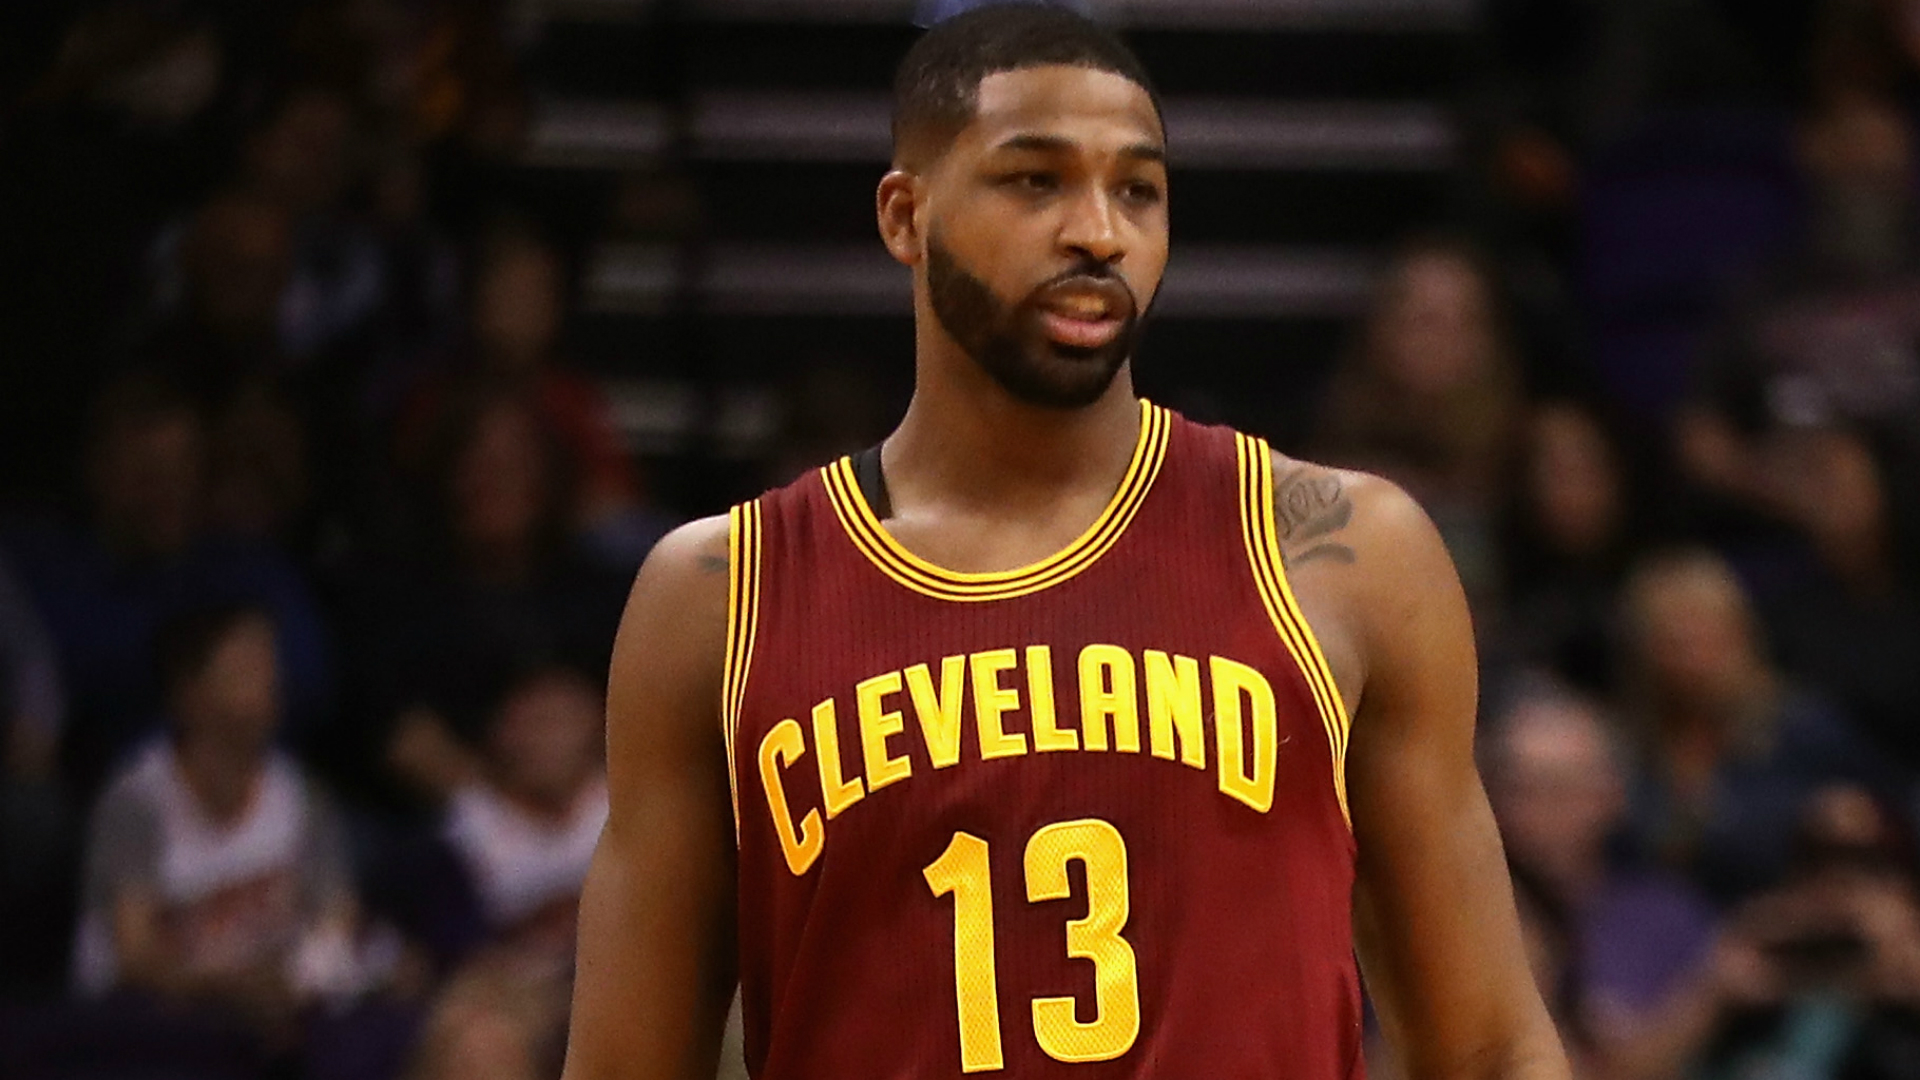 NBA trade rumors: Cavs could deal Tristan Thompson | Sporting News